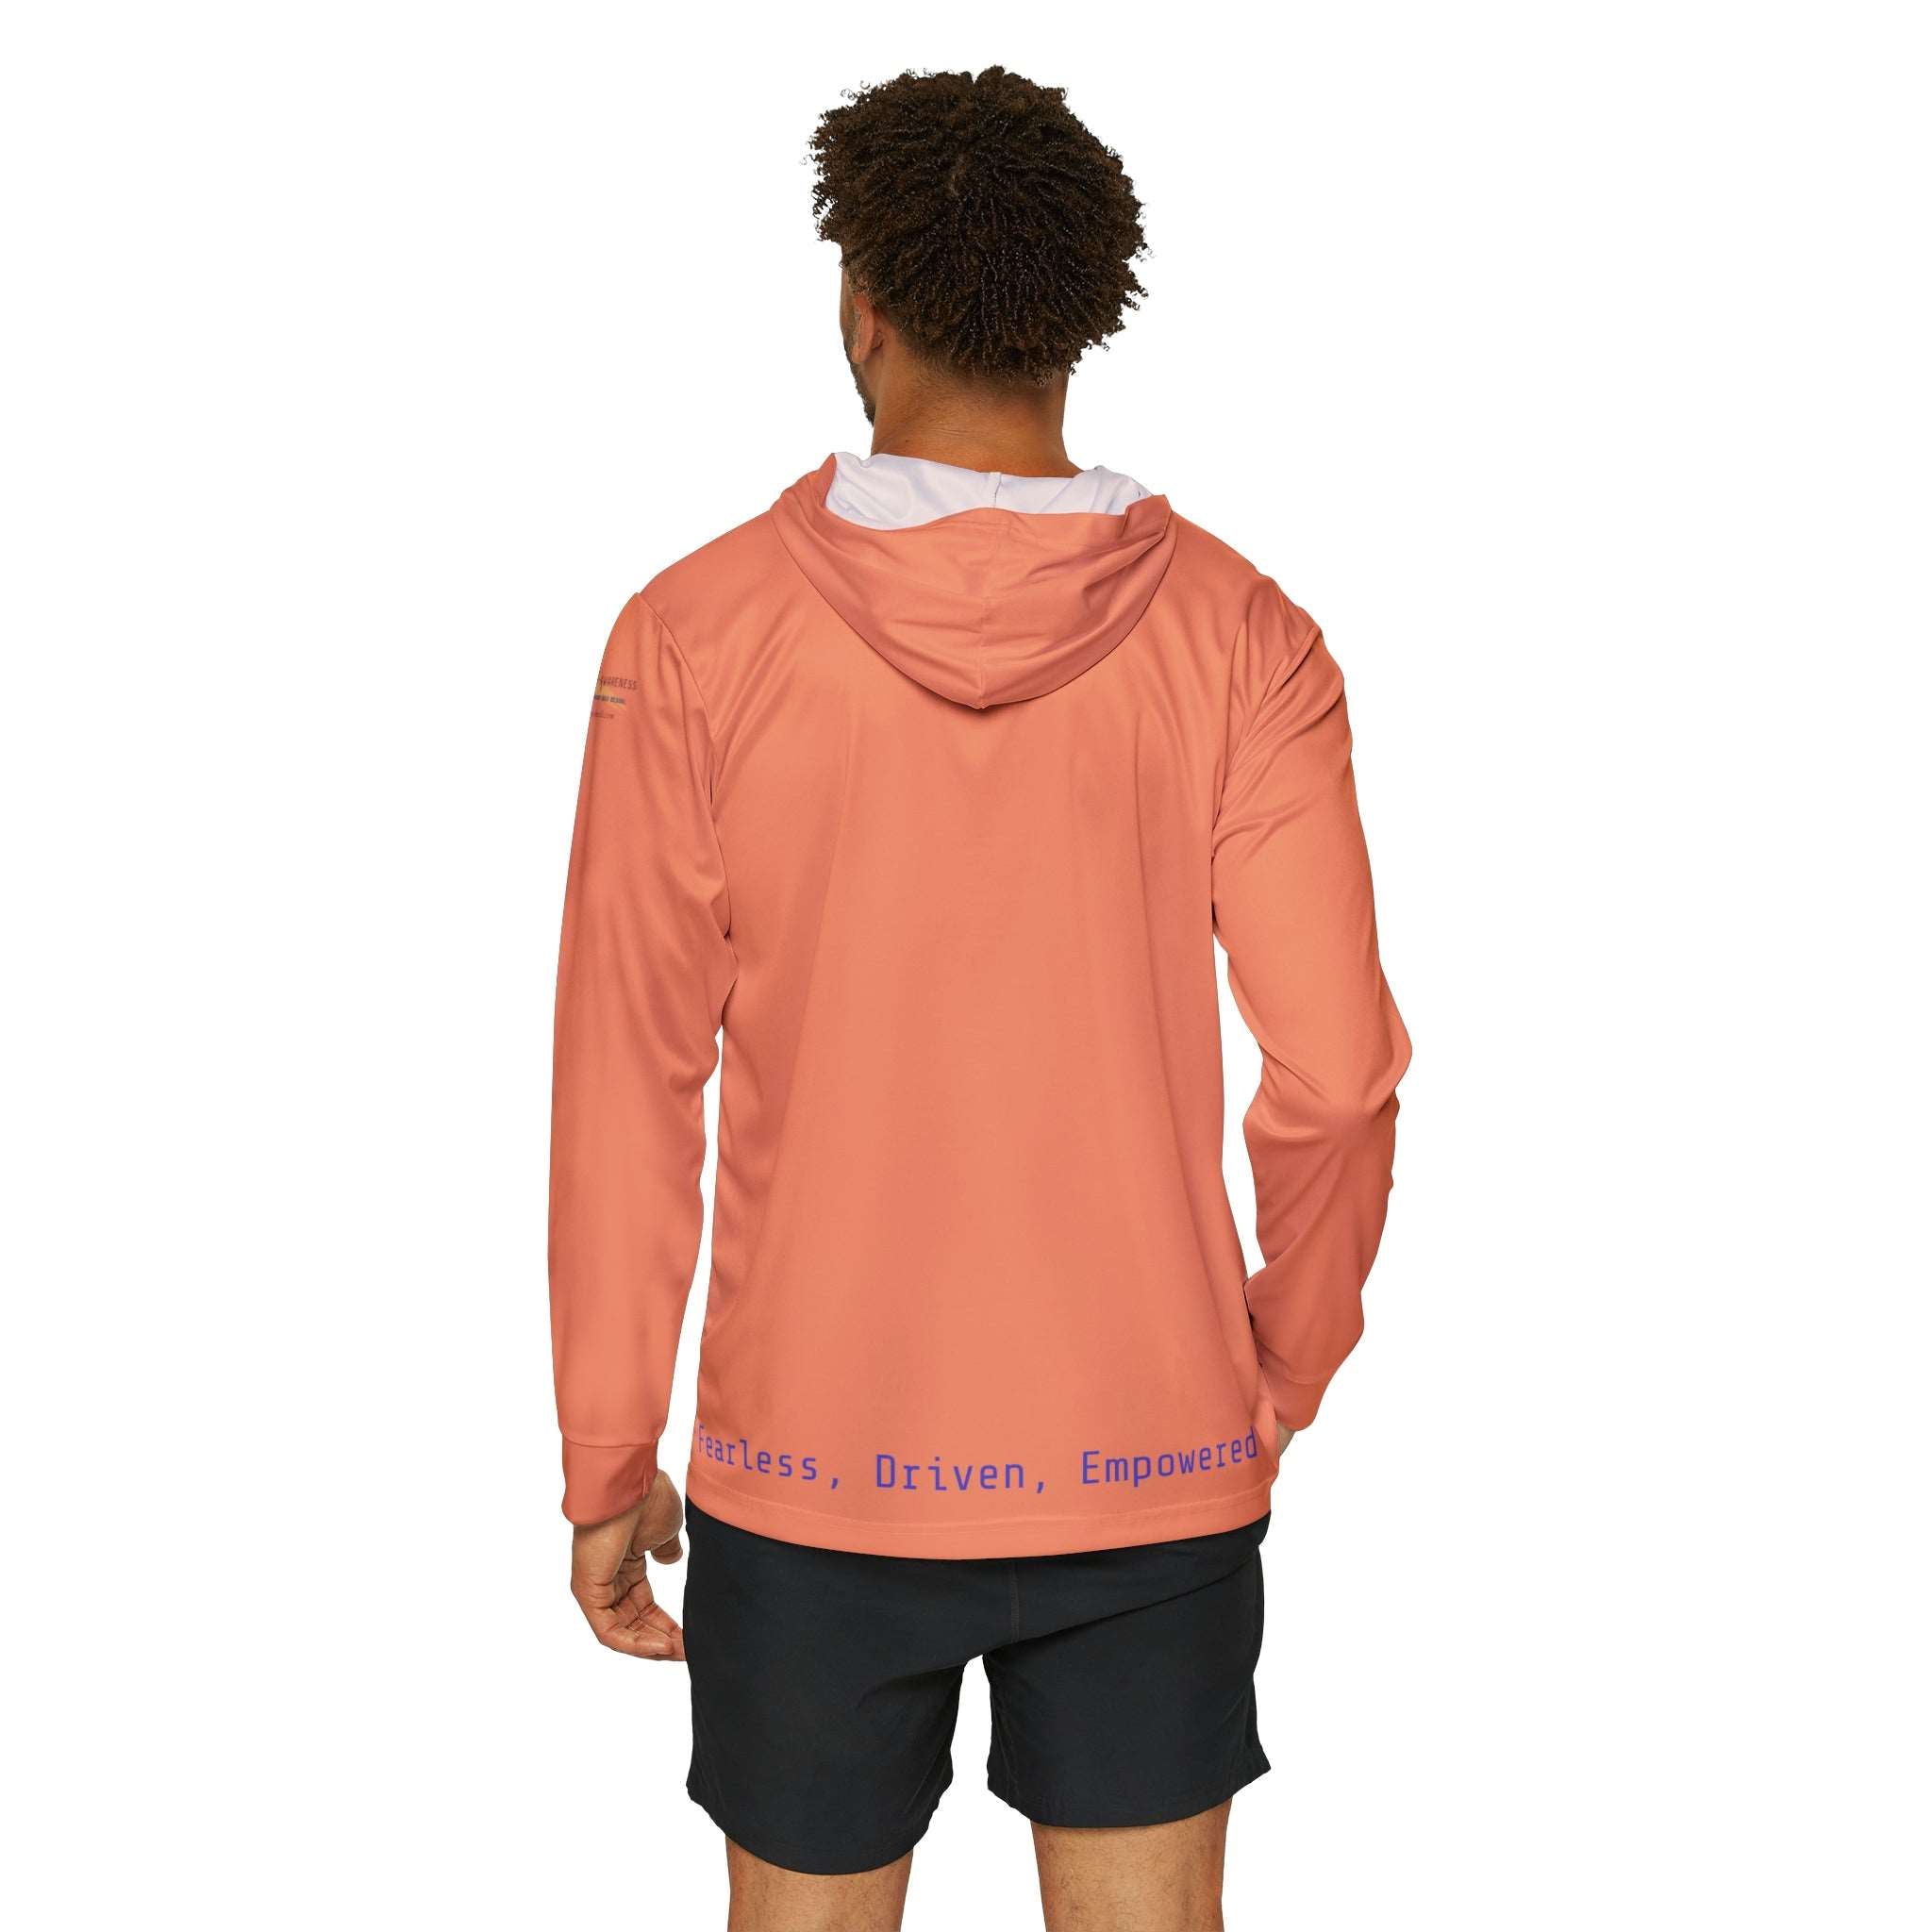 Empowered Men's Warmup Hoodie: Feel Invincible Activewear Durable Fabric Made in USA Men's Hoodie Mental Health Support Moisture-wicking Performance Apparel Quality Control Sports Warmup UPF 50+ All Over Prints 3068732605116074268_2048_f93b489d-ebe1-4a9d-89e2-6159ebffb3f6 Printify